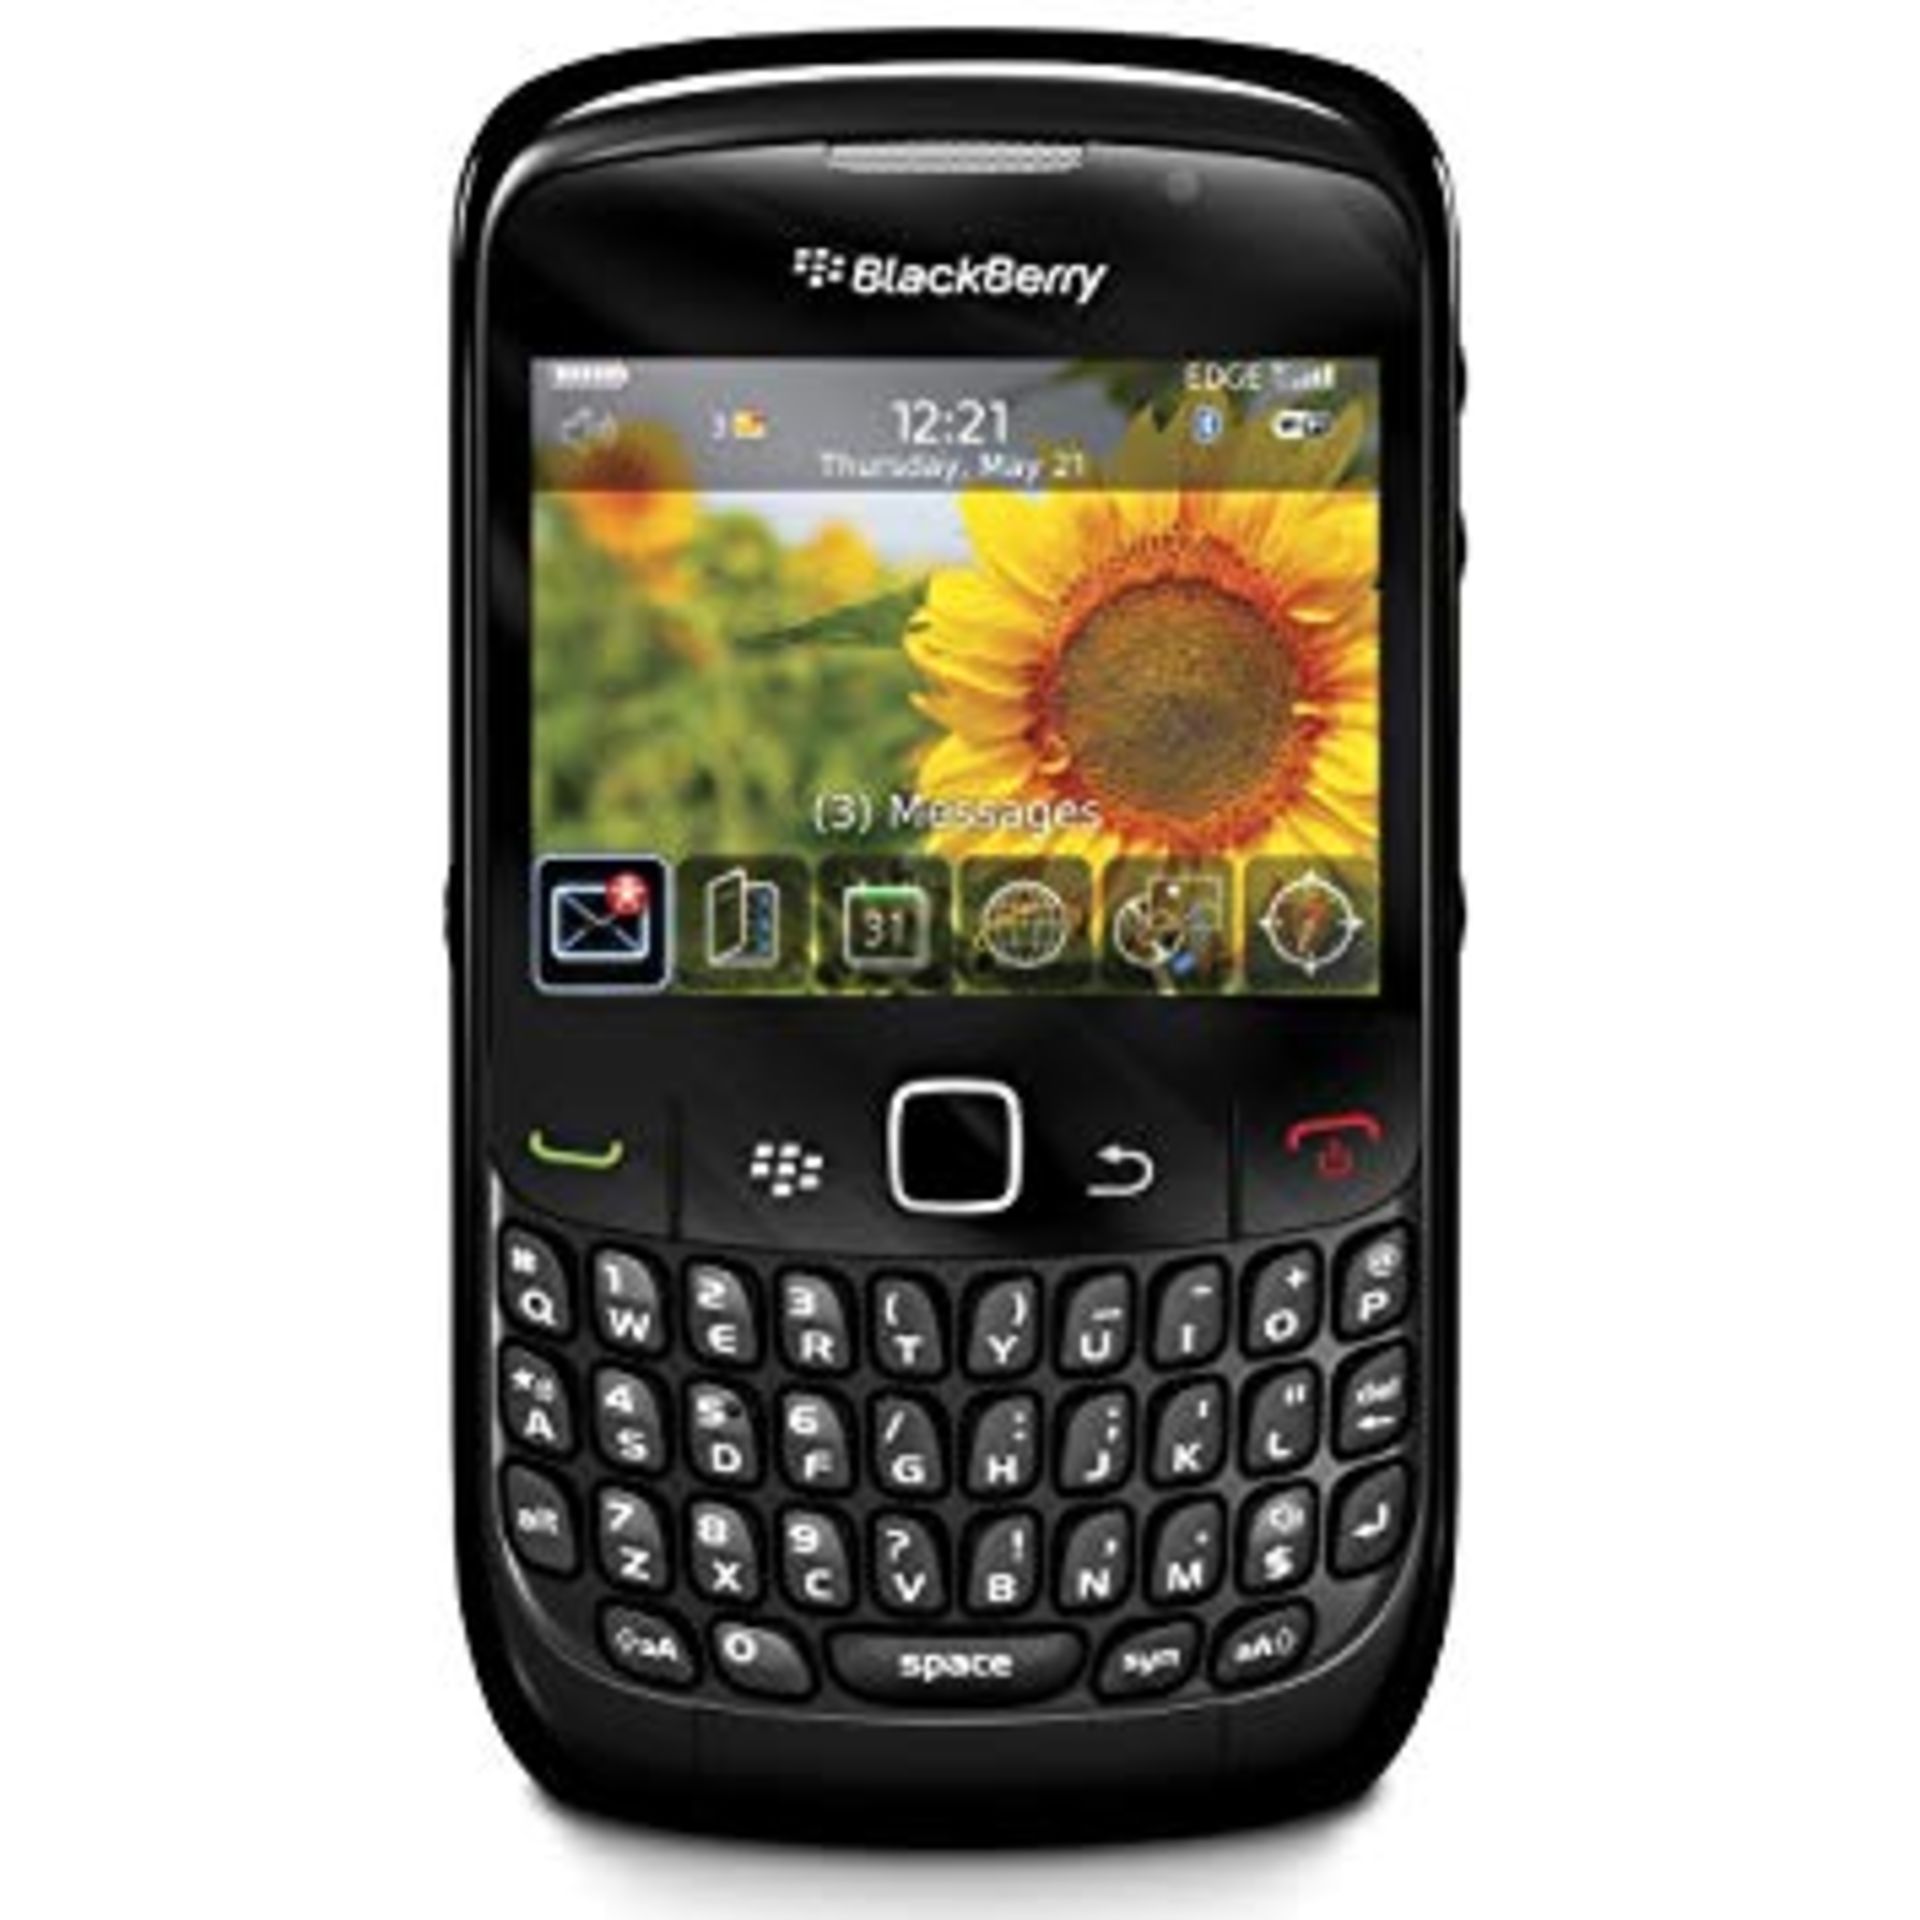 Grade A Blackberry 8520 Colours May Vary Item available approx 12 working days after sale